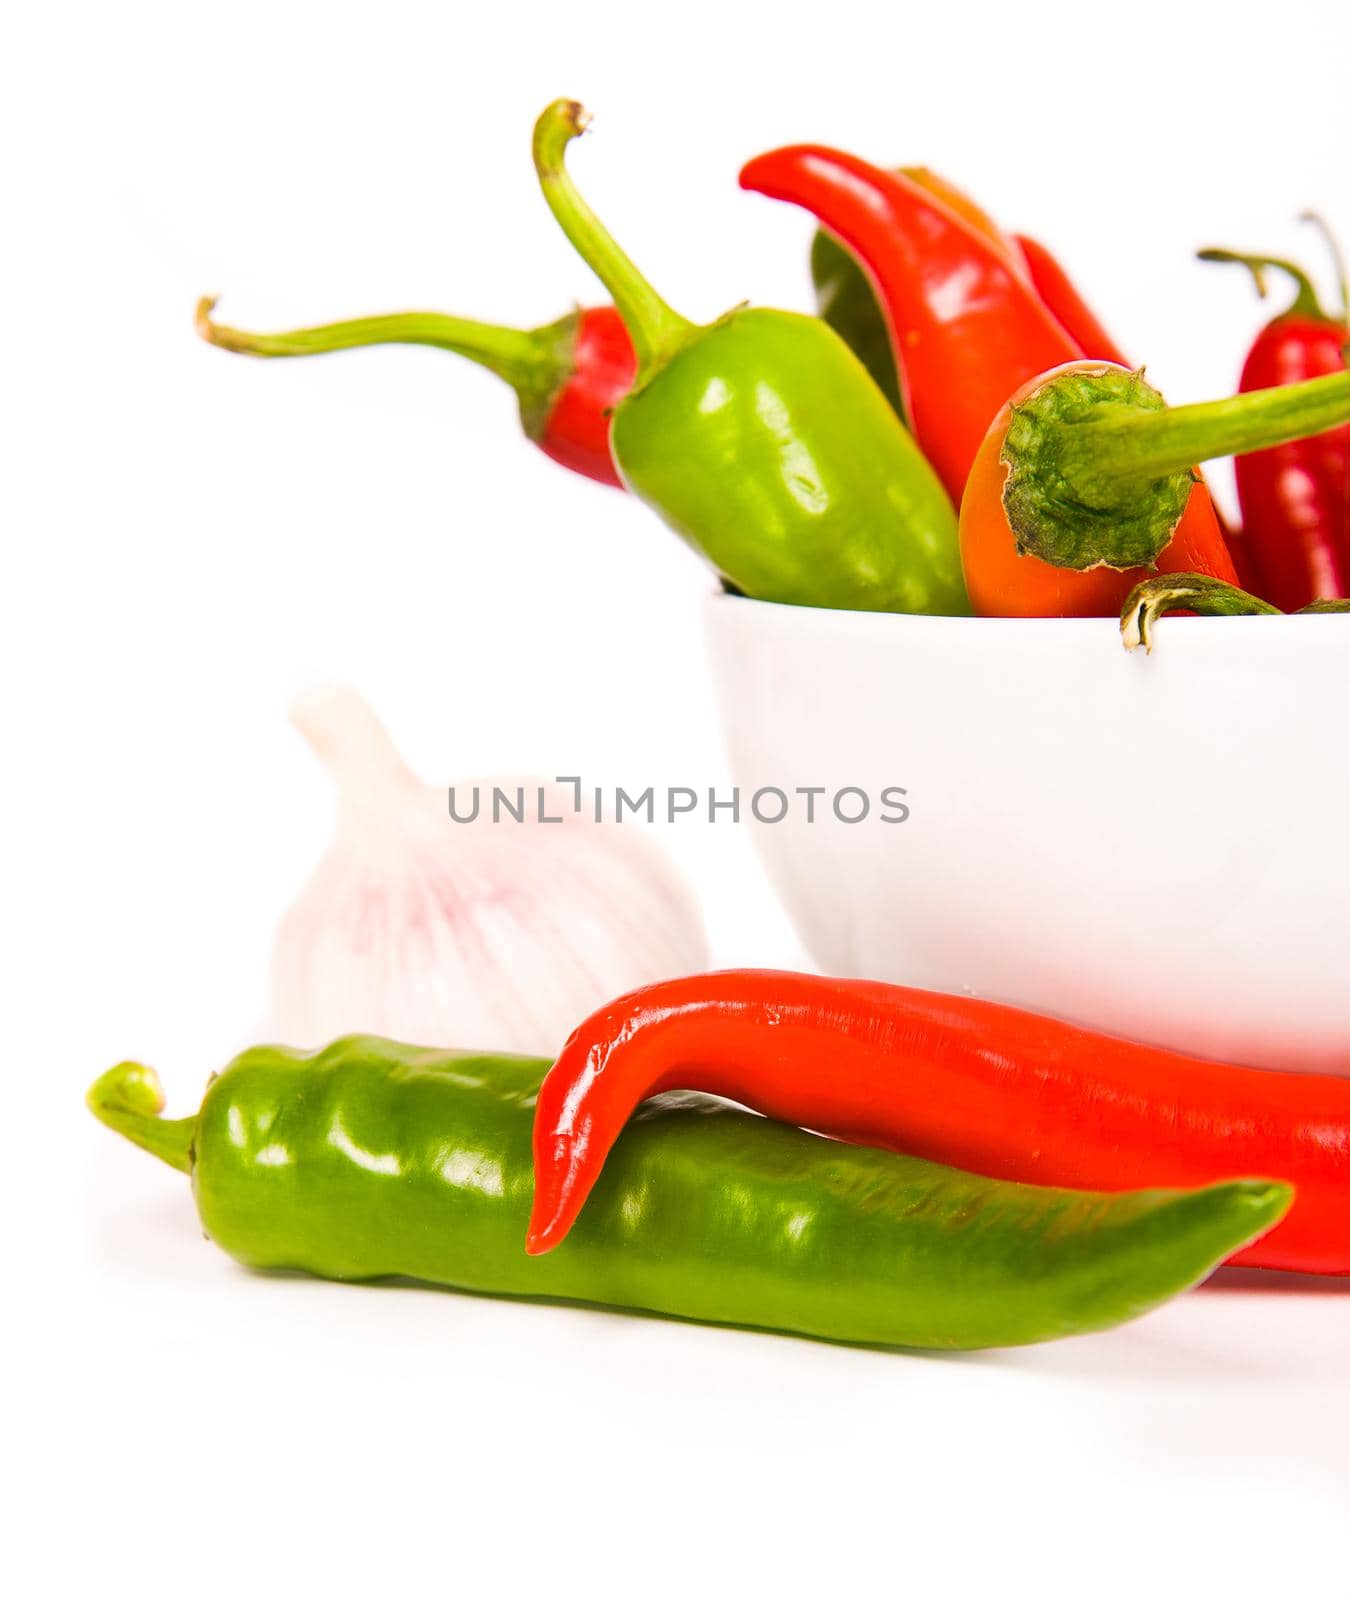 Red chili peppers by tan4ikk1